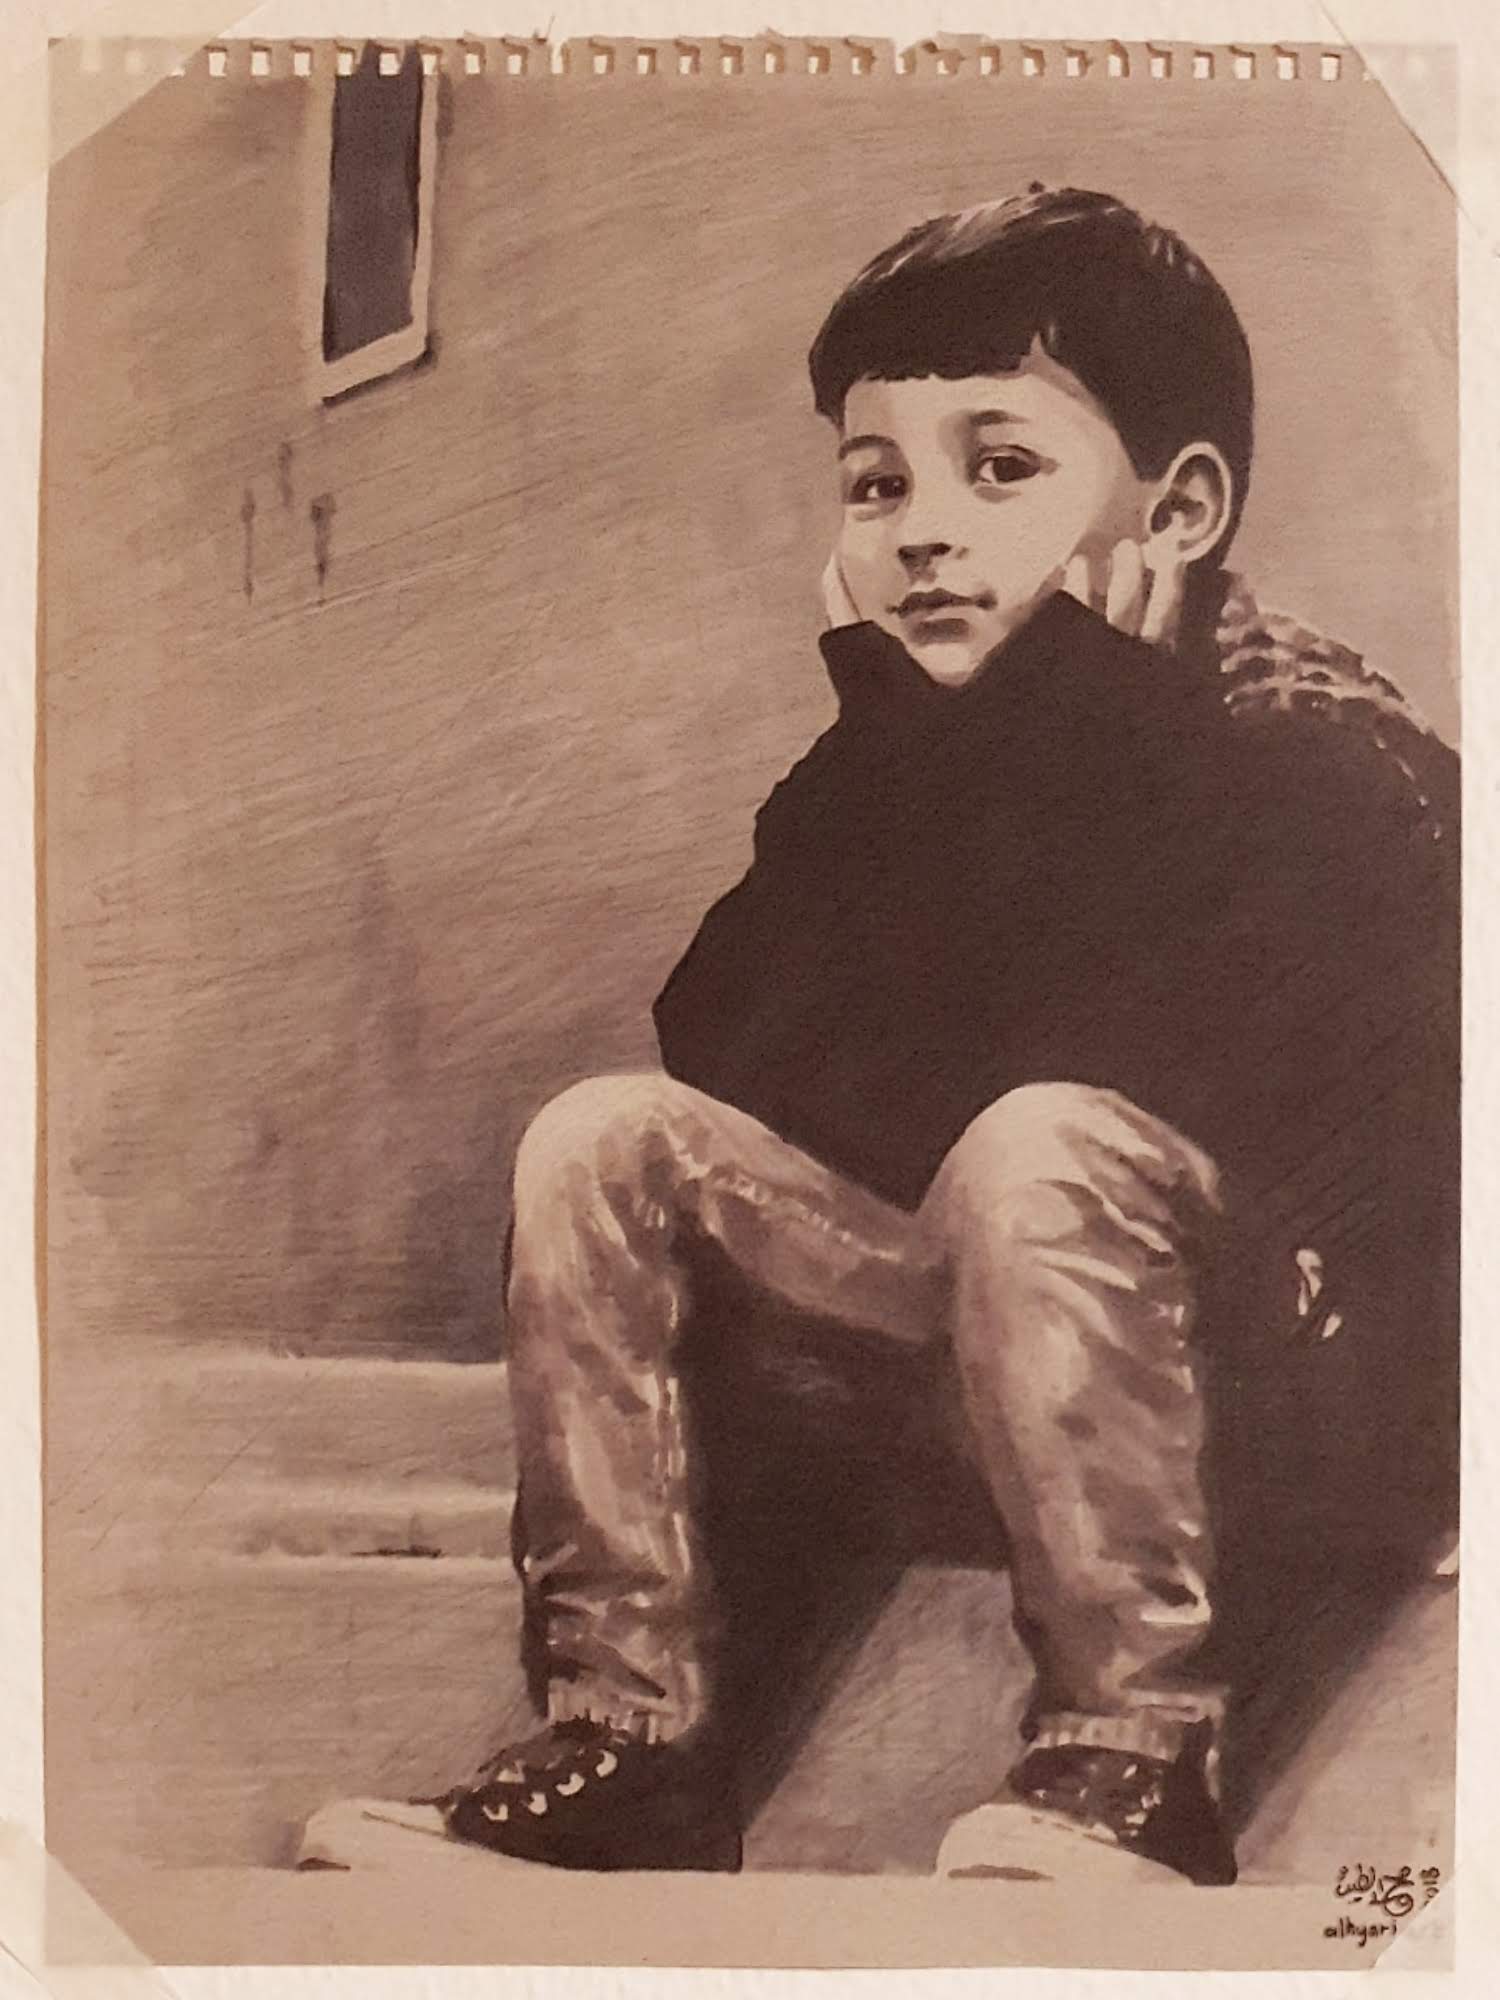 A traditional painting of a boy sitting on stairs in As-Salt city in Jordan, done by Alhyari.Art using copic markers, pencils and pens on toned paper | لوحة لطفل جالس على درج في مدينة السلط، الأردن، الحياري.آرت